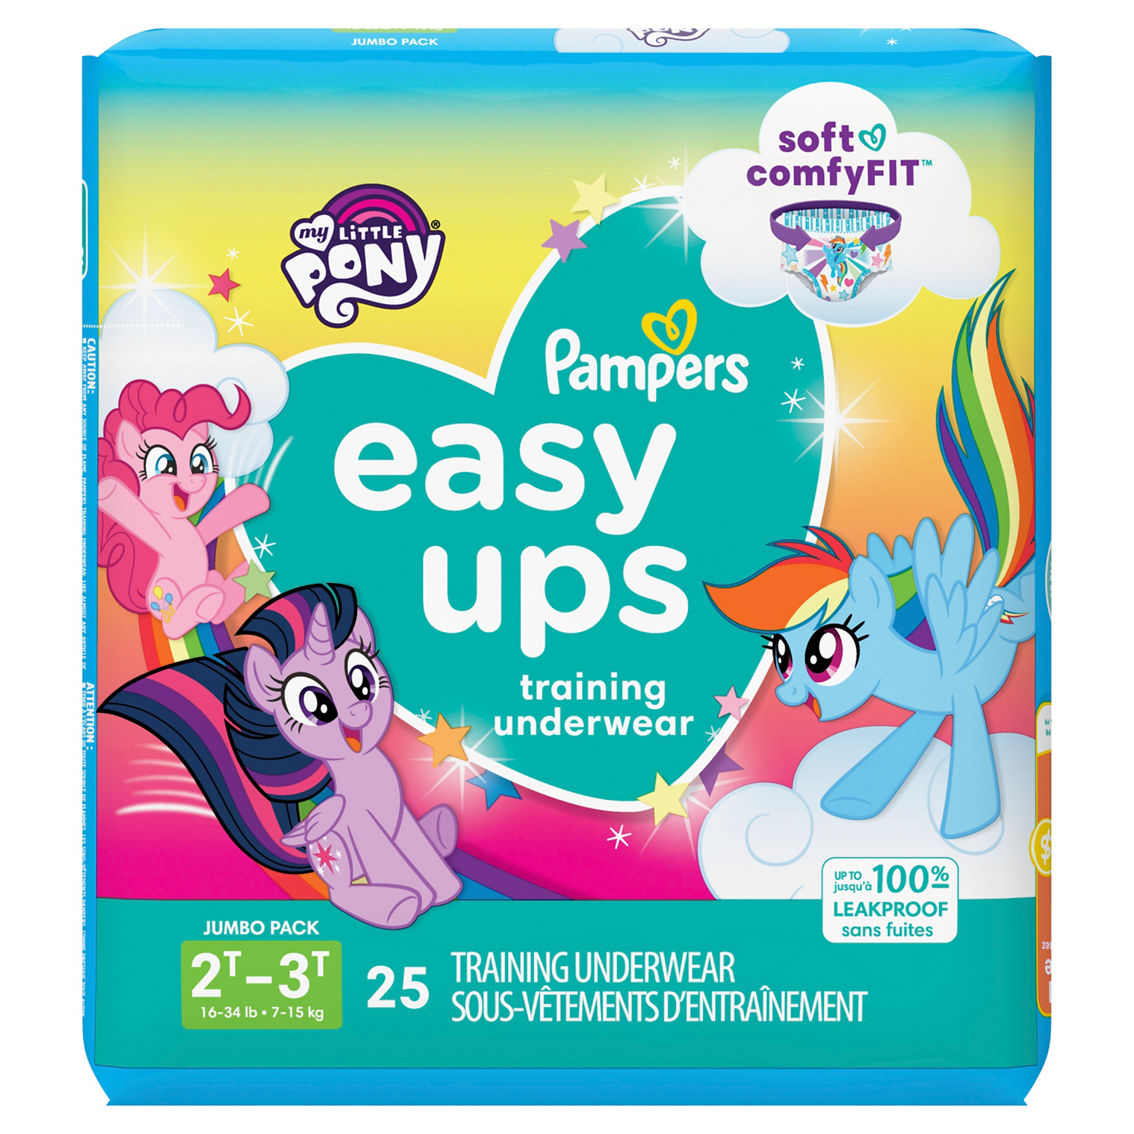 Pampers Girls Easy Ups Training Underwear Size 2t-3t (16-34 Lb.) 74 Ct., Training Pants, Baby & Toys